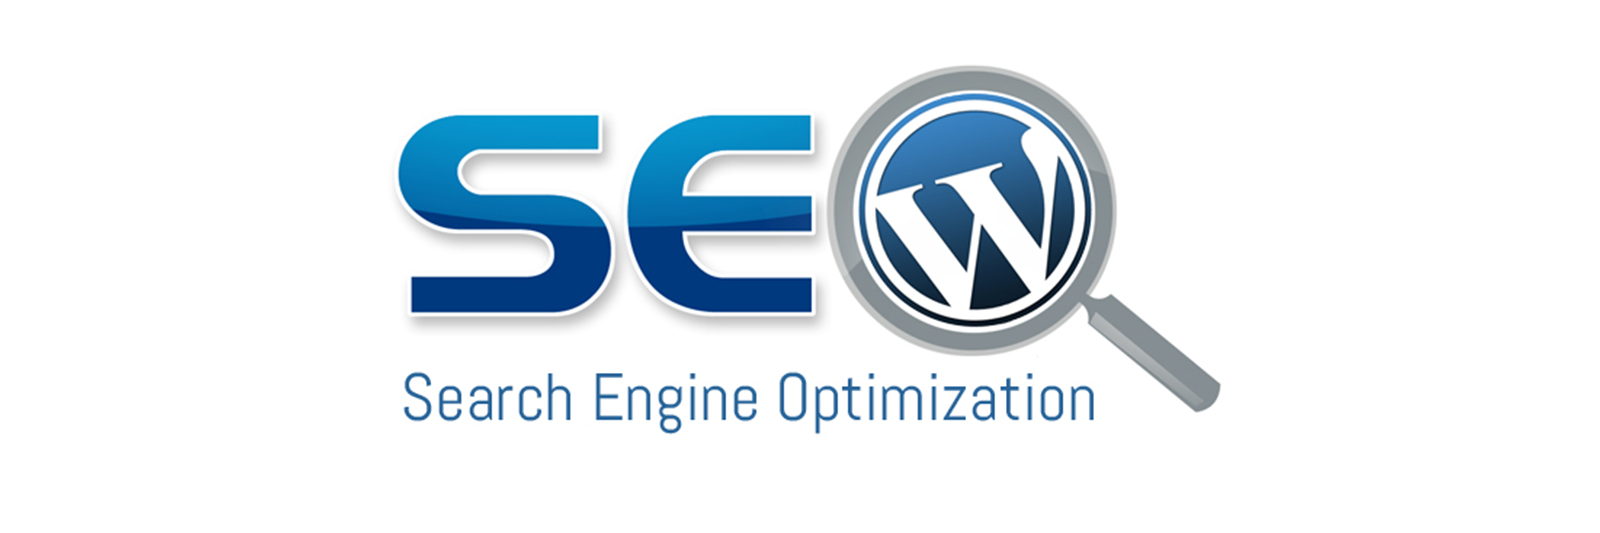 CRUCIAL ELEMENTS OF WORDPRESS FOR SEO